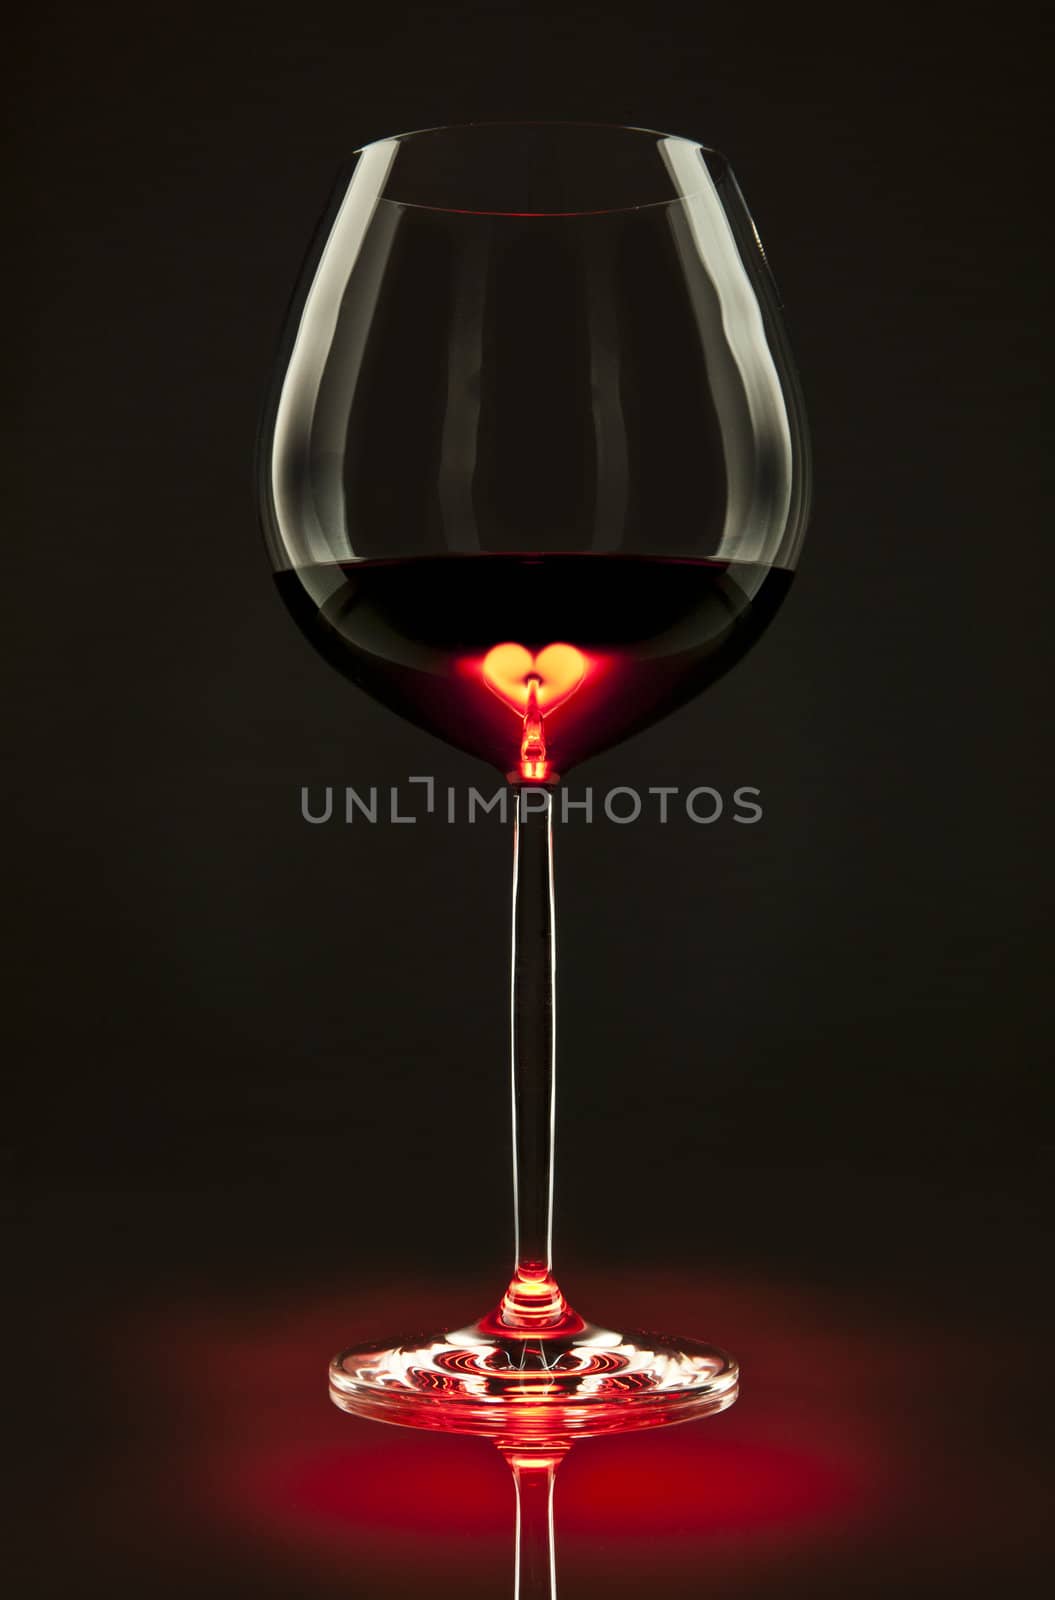 Heart of the wine by avix